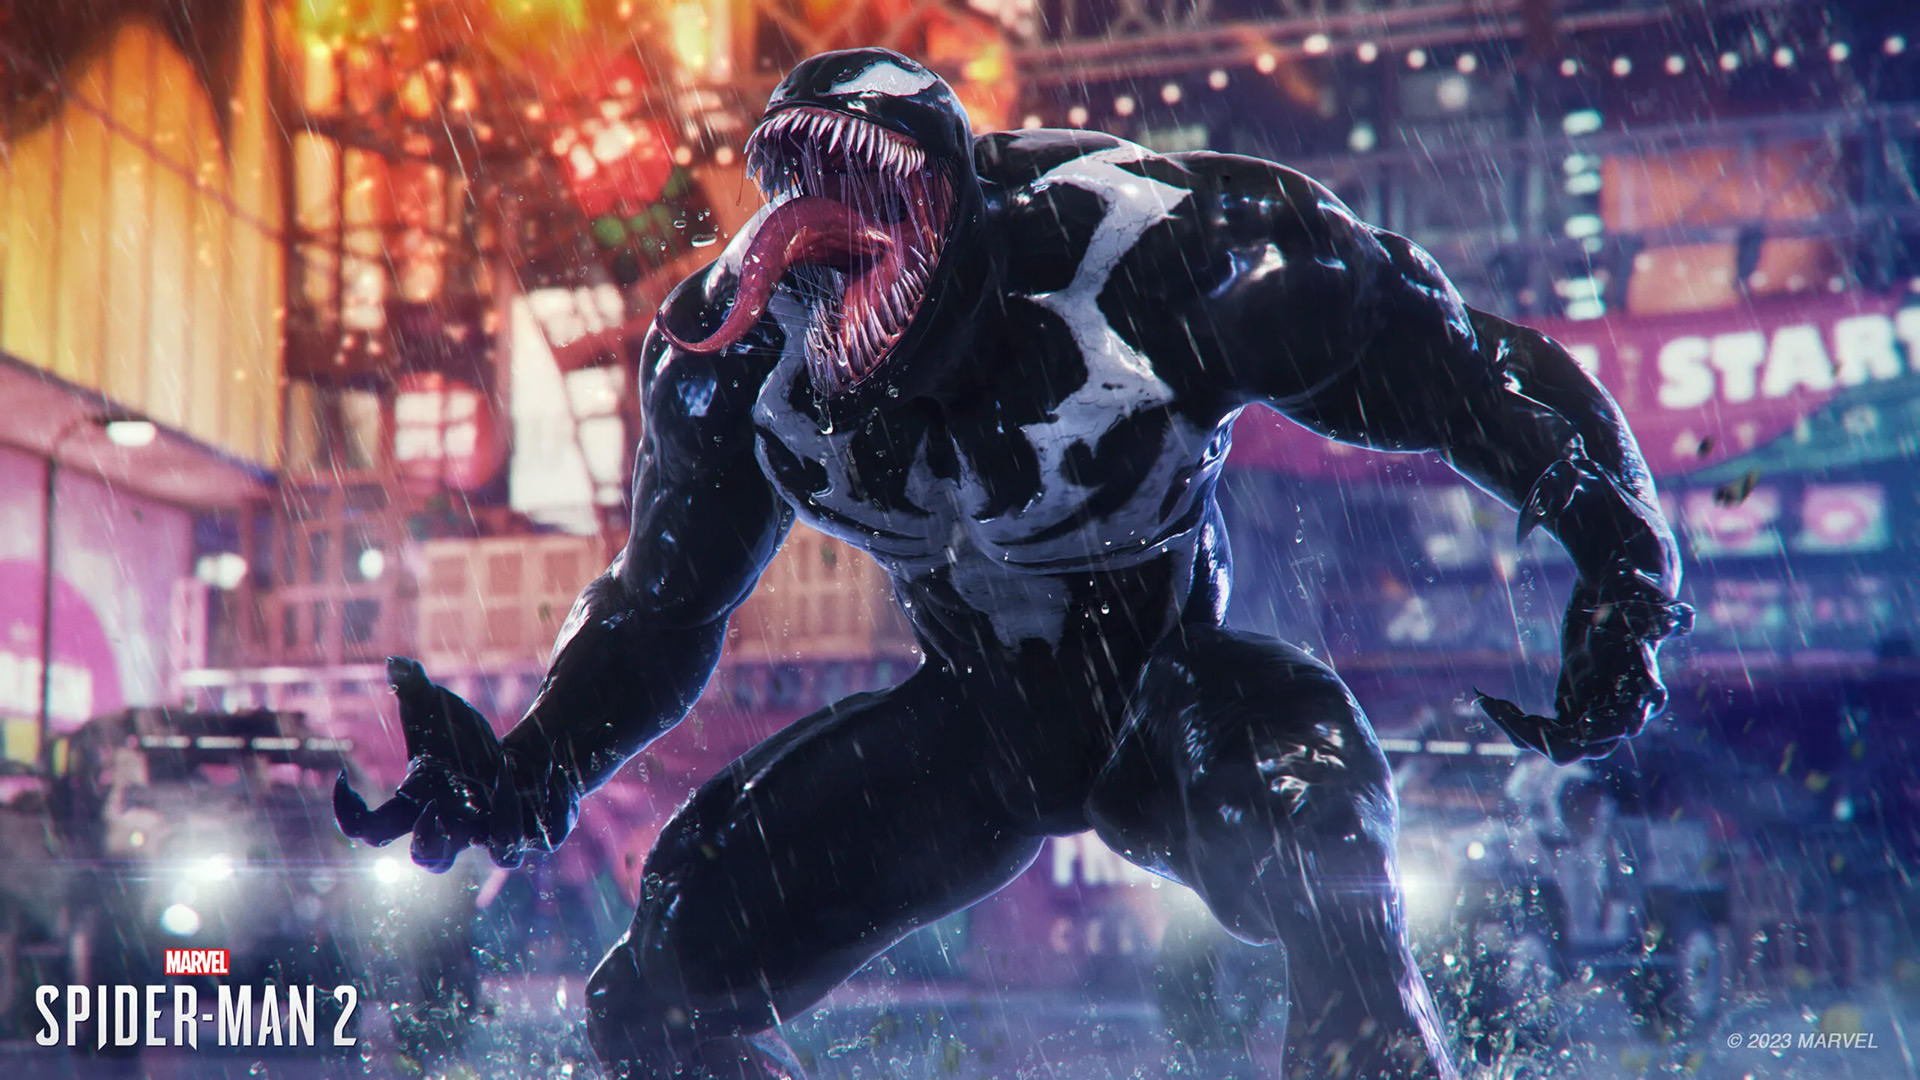 Venom makes an appearance in Spider-Man 2's story trailer